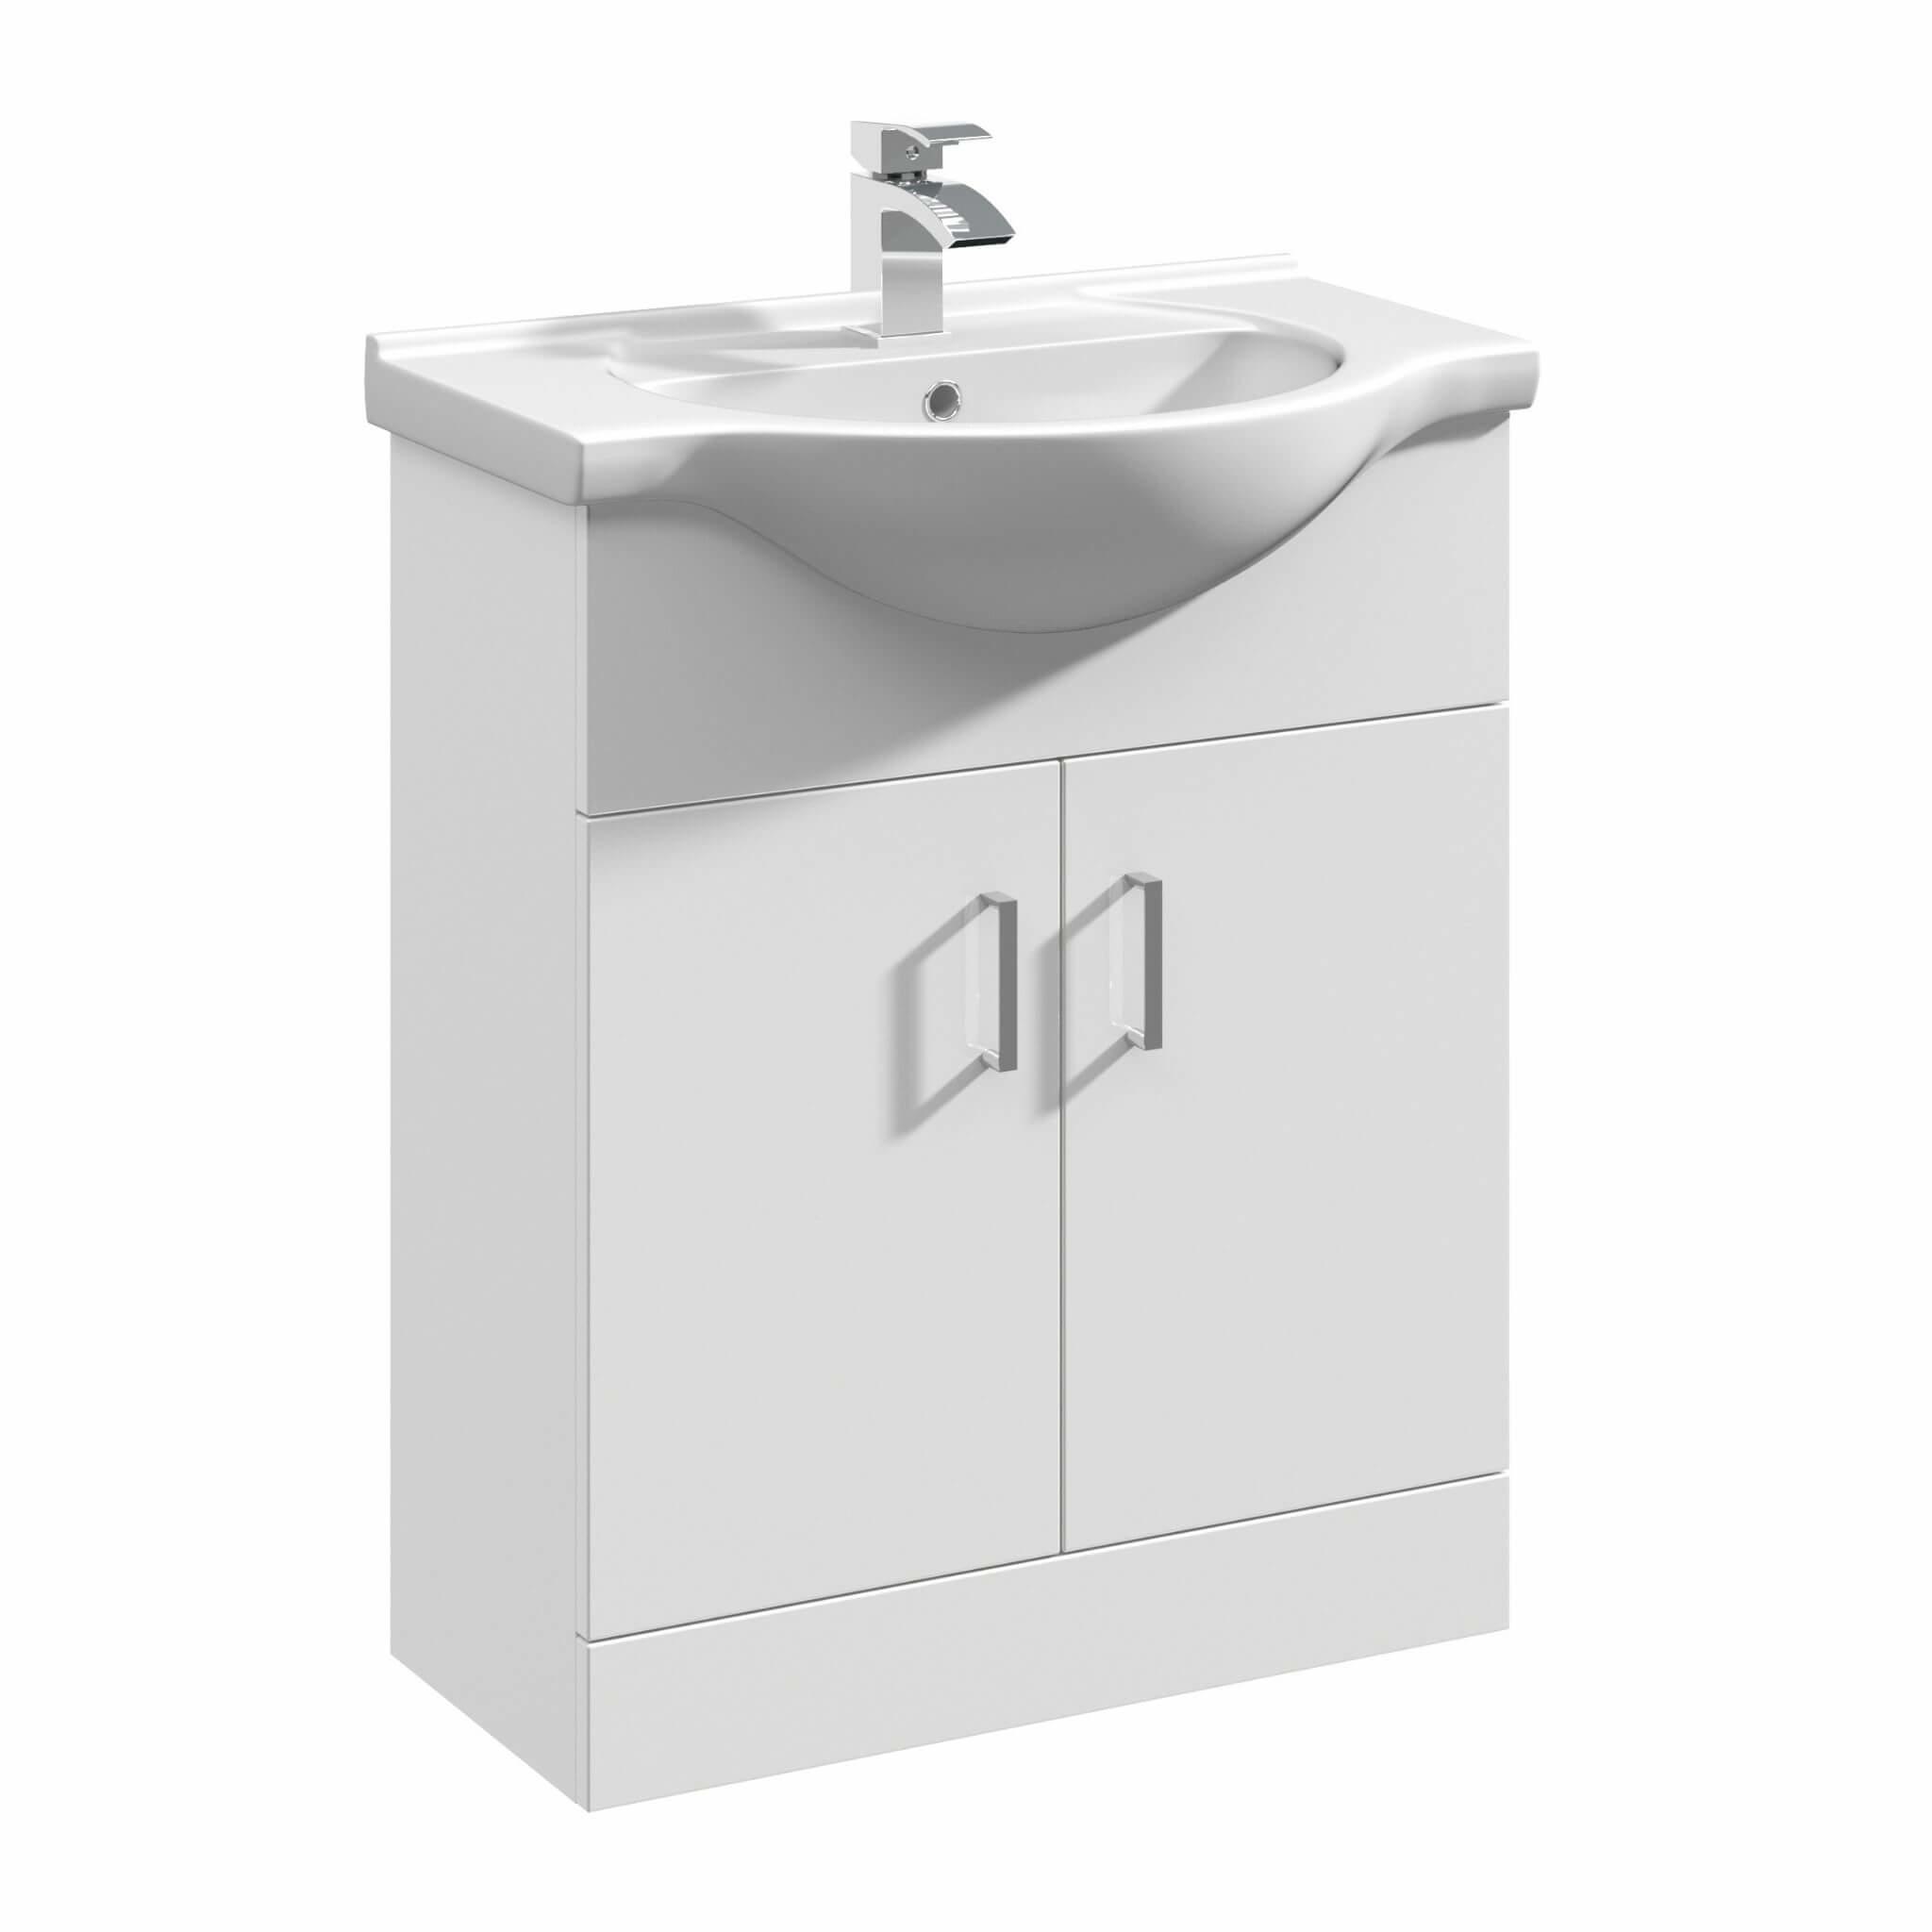 An image of Nuie Mayford White Vanity Unit With Basin W650 X D300Mm - Prc103_Nbc003